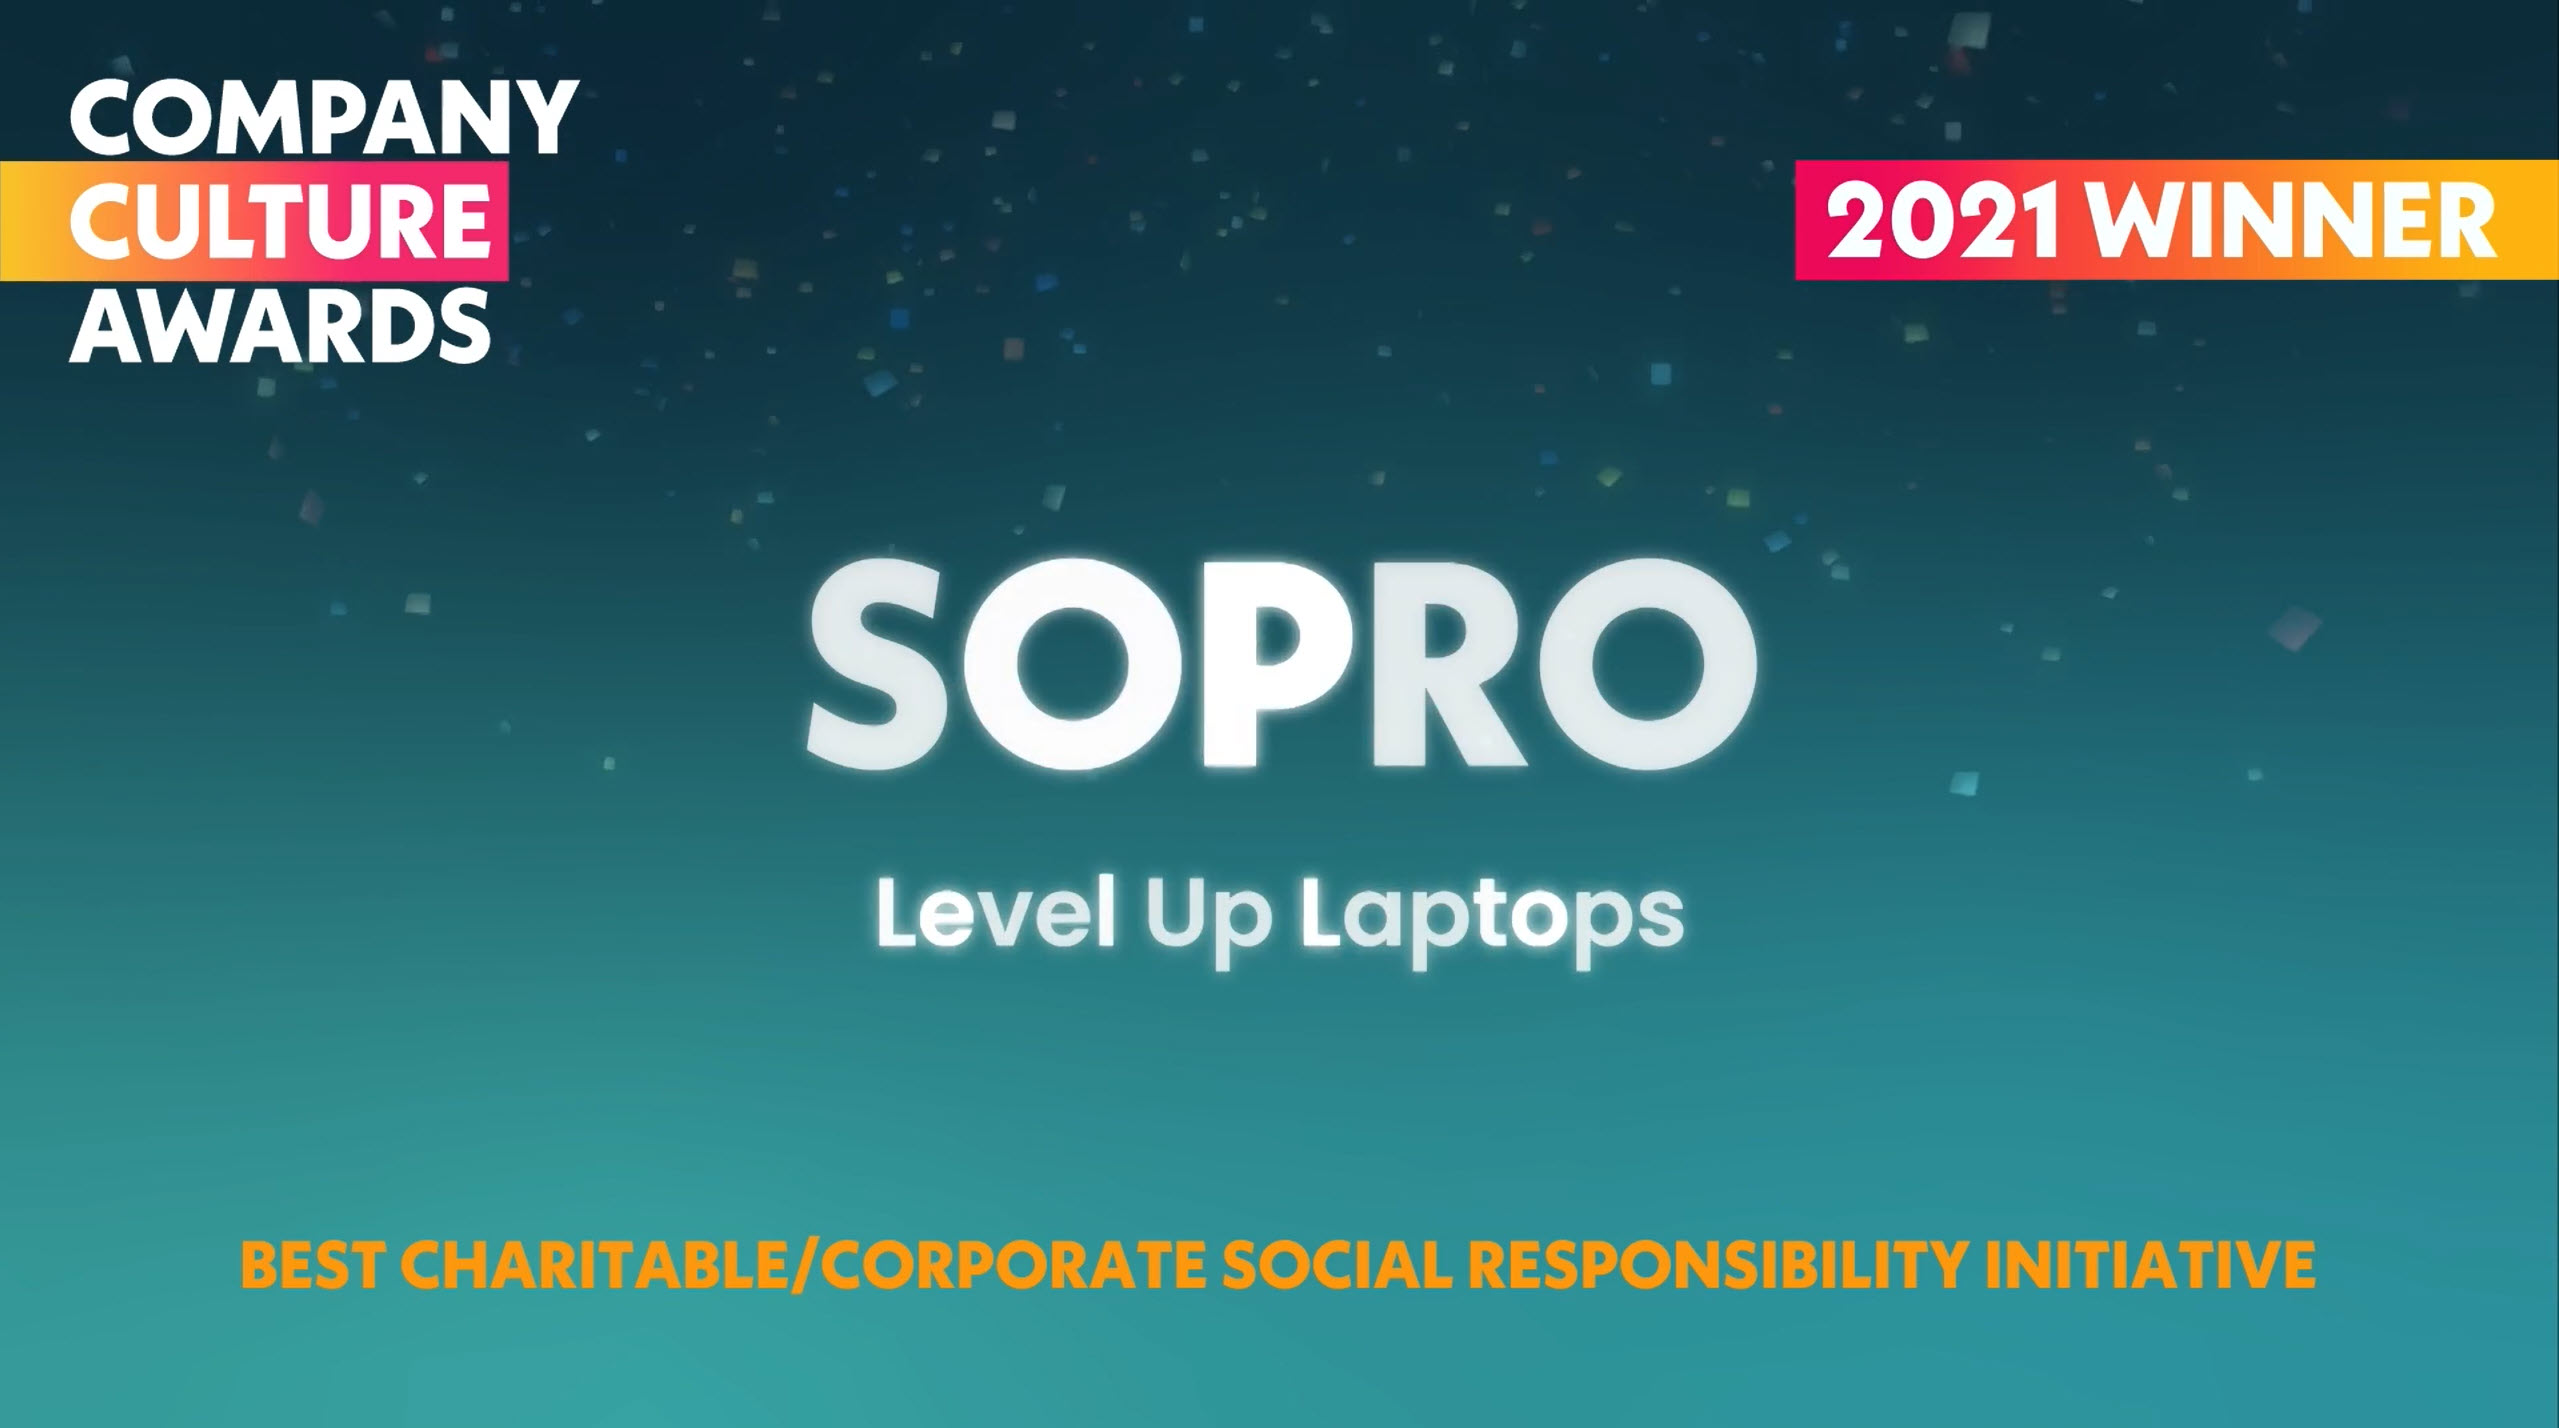 Sopro named winners at Company Culture Awards Sopro